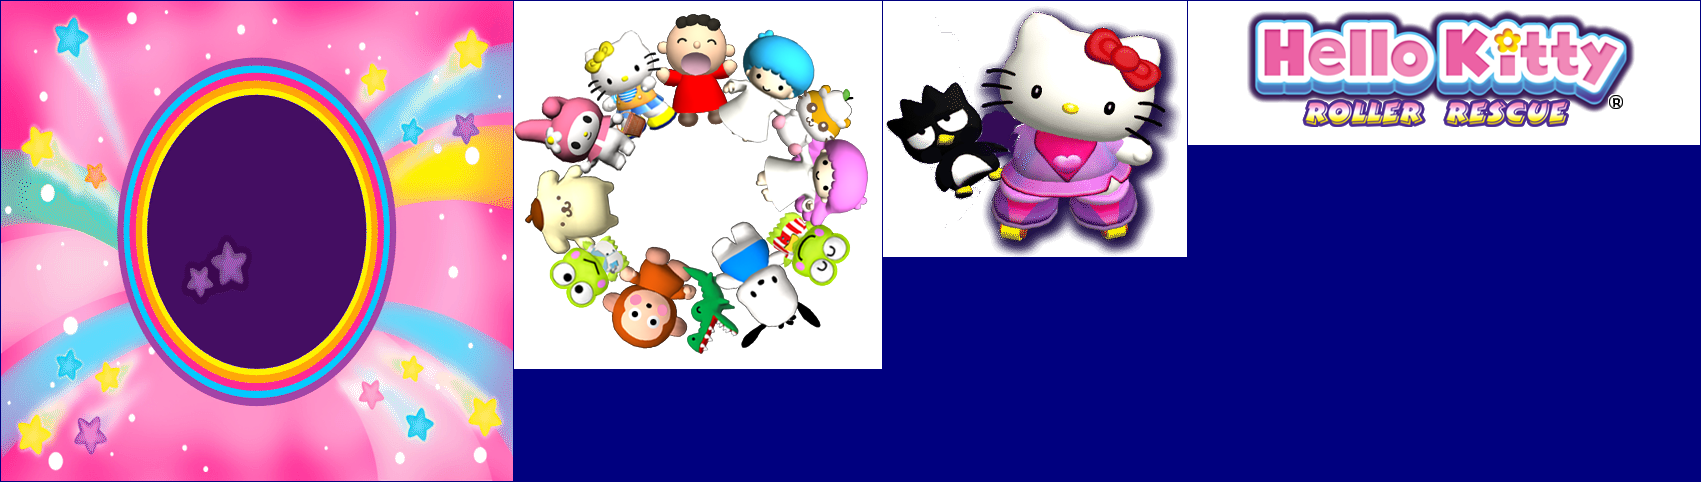 Hello Kitty: Roller Rescue - Title Screen